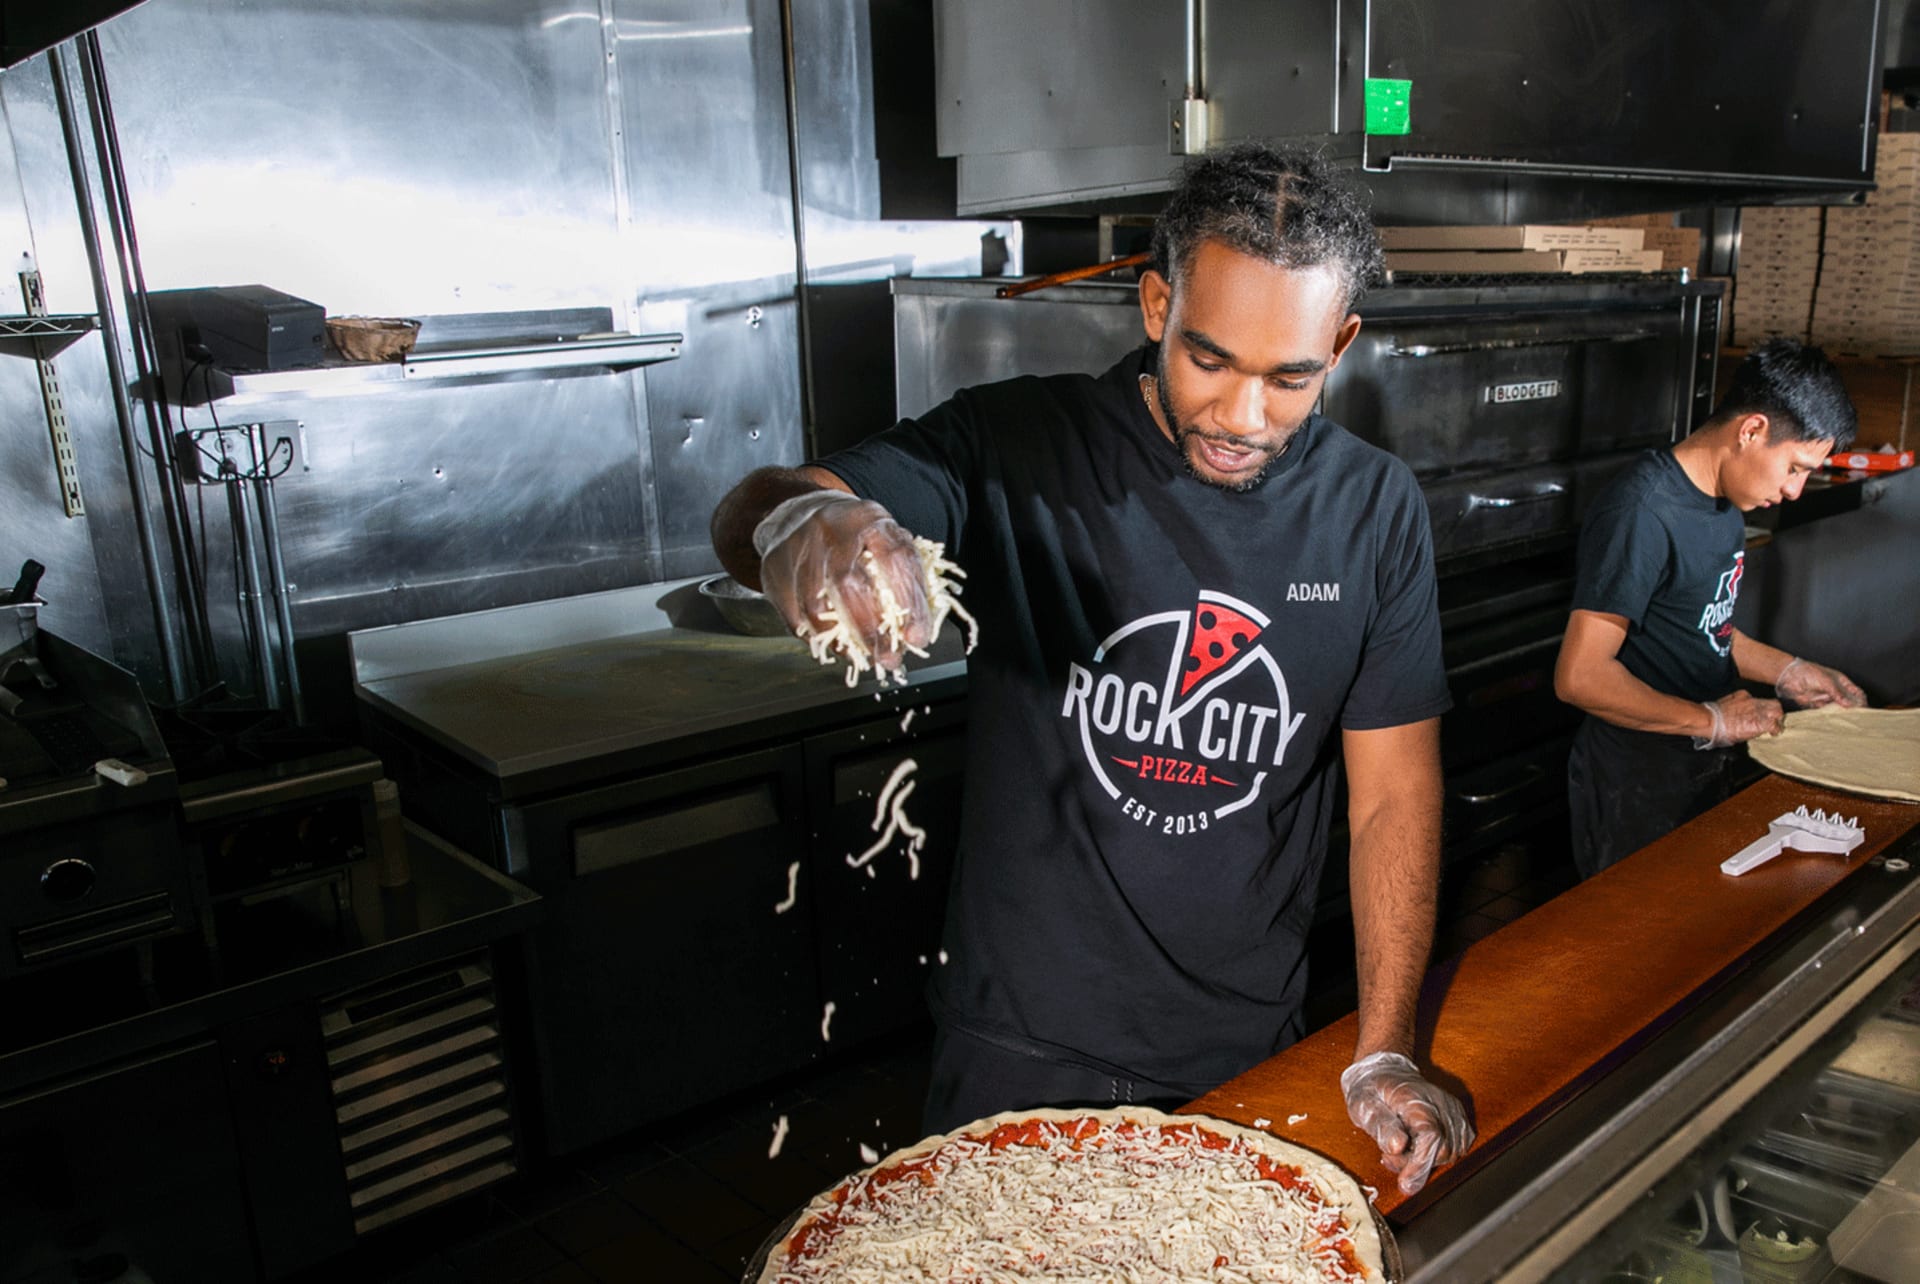 A young chef owner wearing a making authentic pizza in his restaurant.